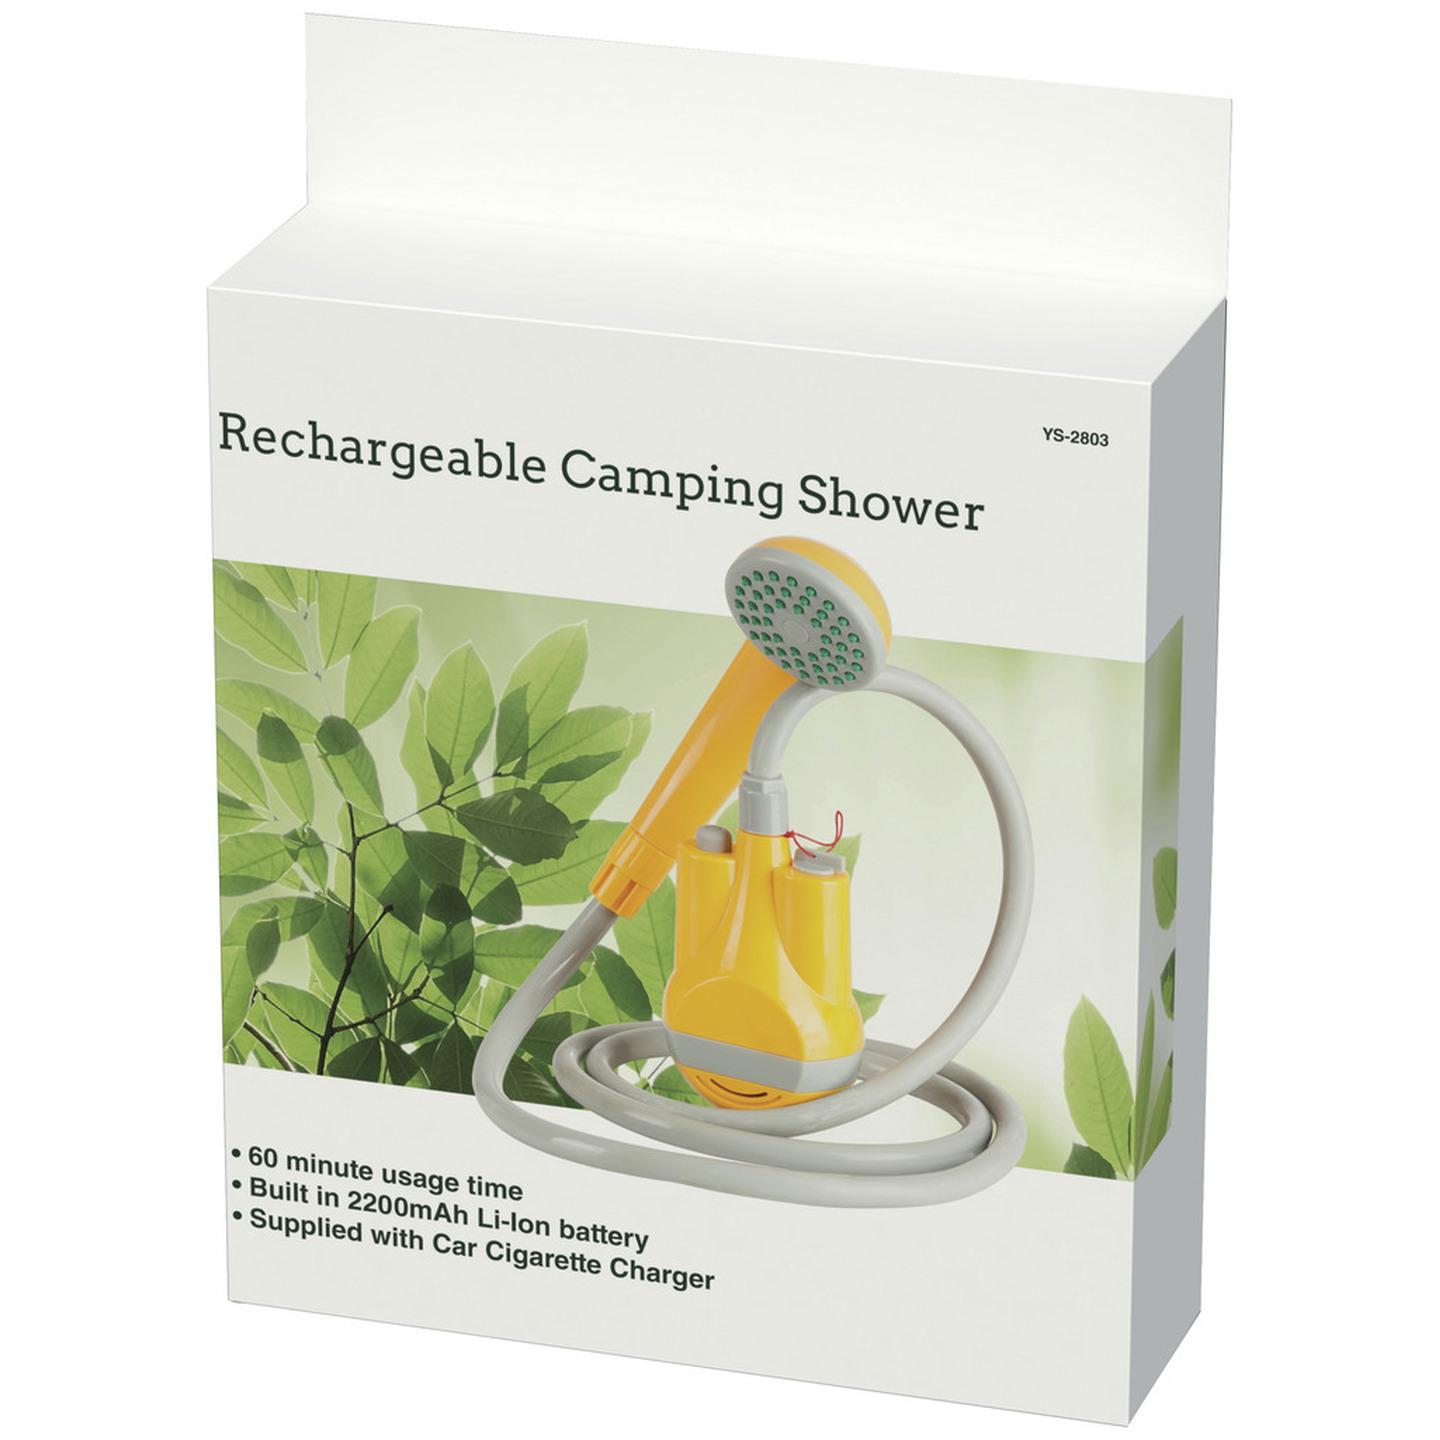 Rechargeable Camping Shower